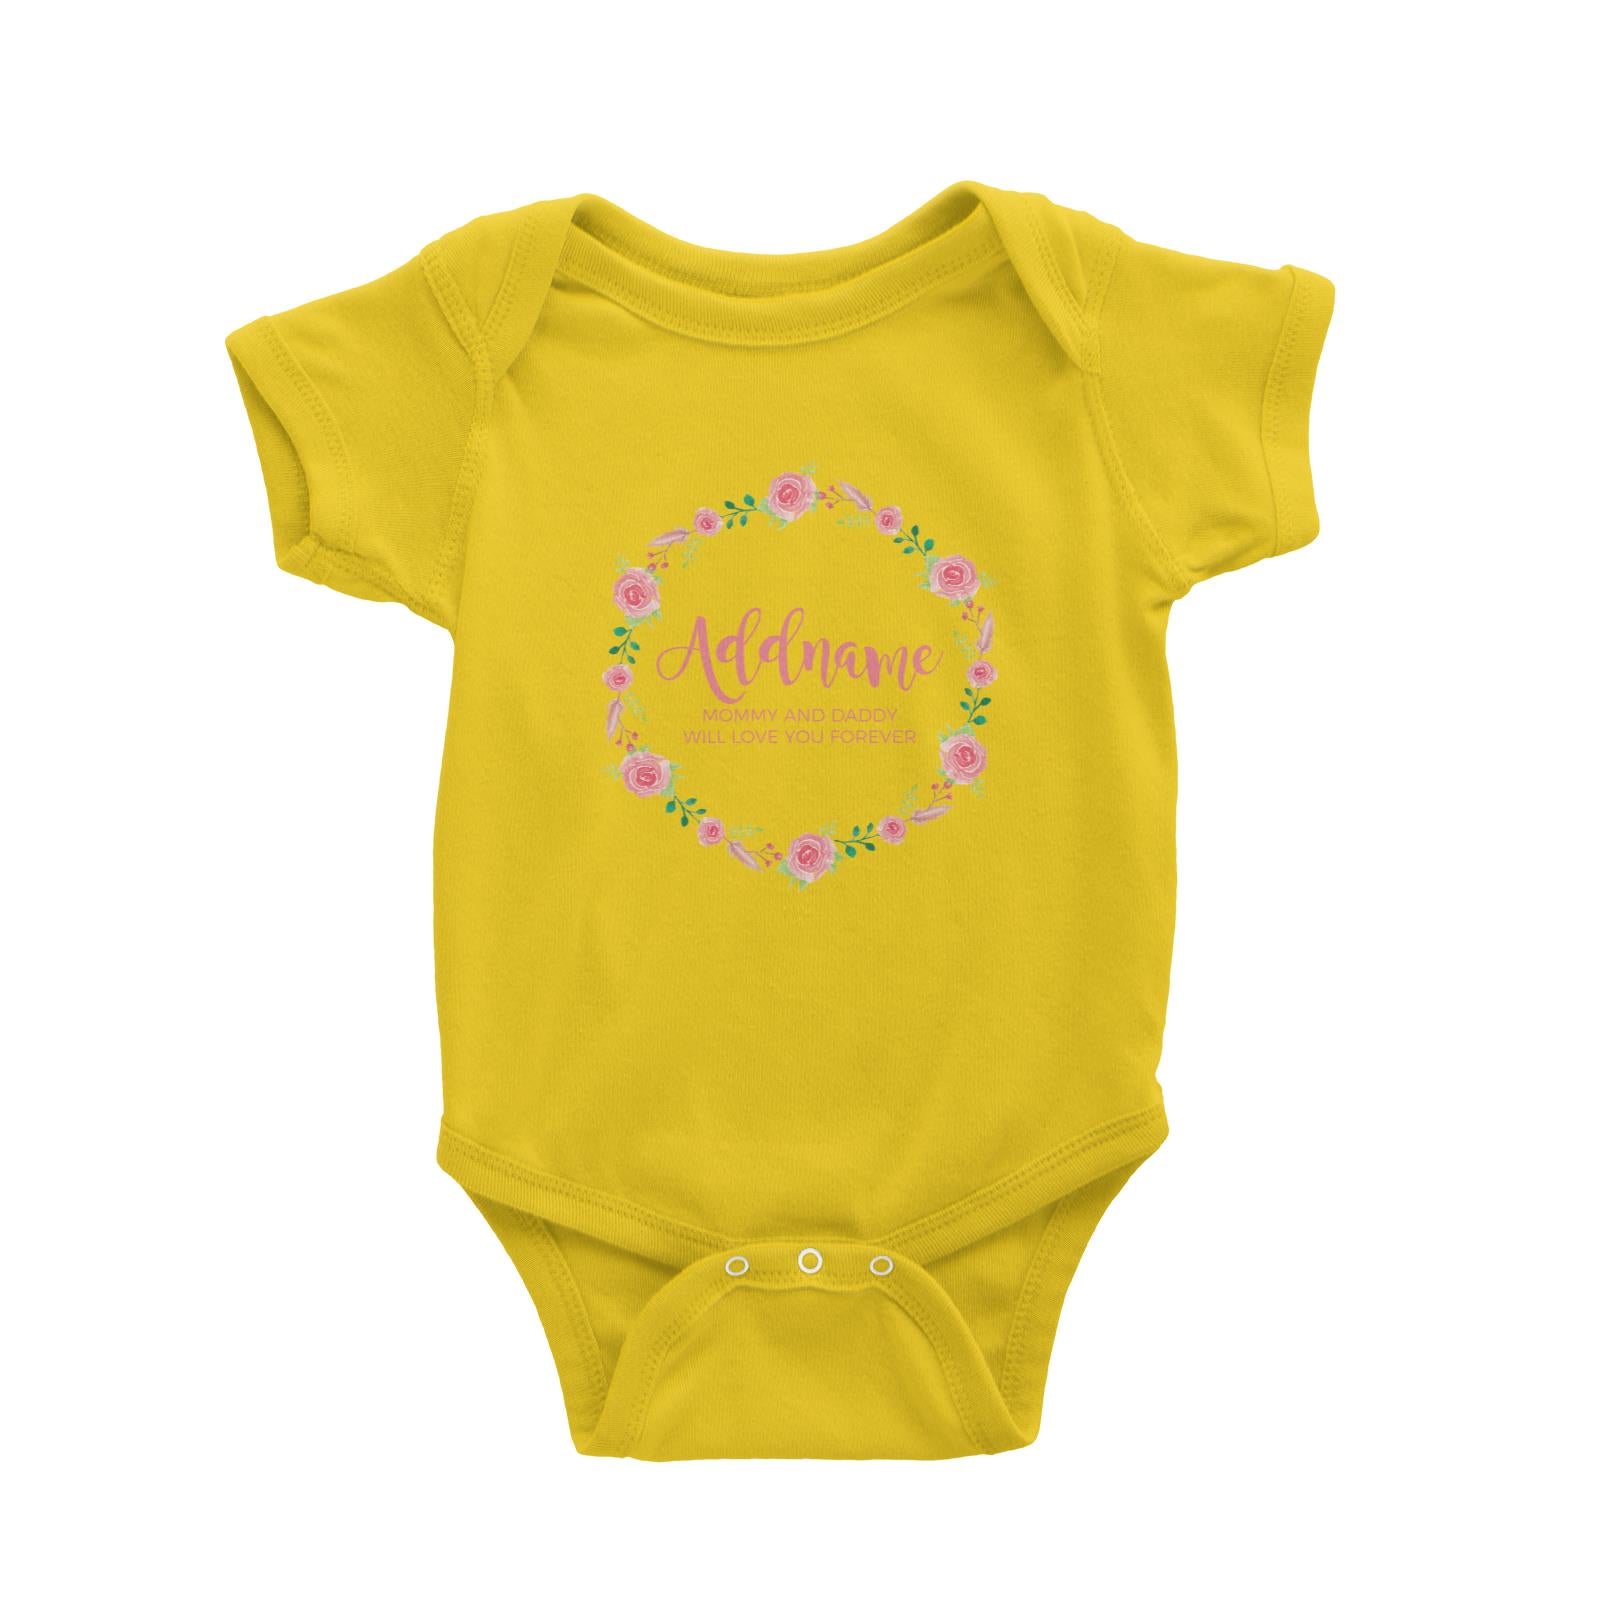 Pink Roses Wreath Personalizable with Name and Text Baby Romper